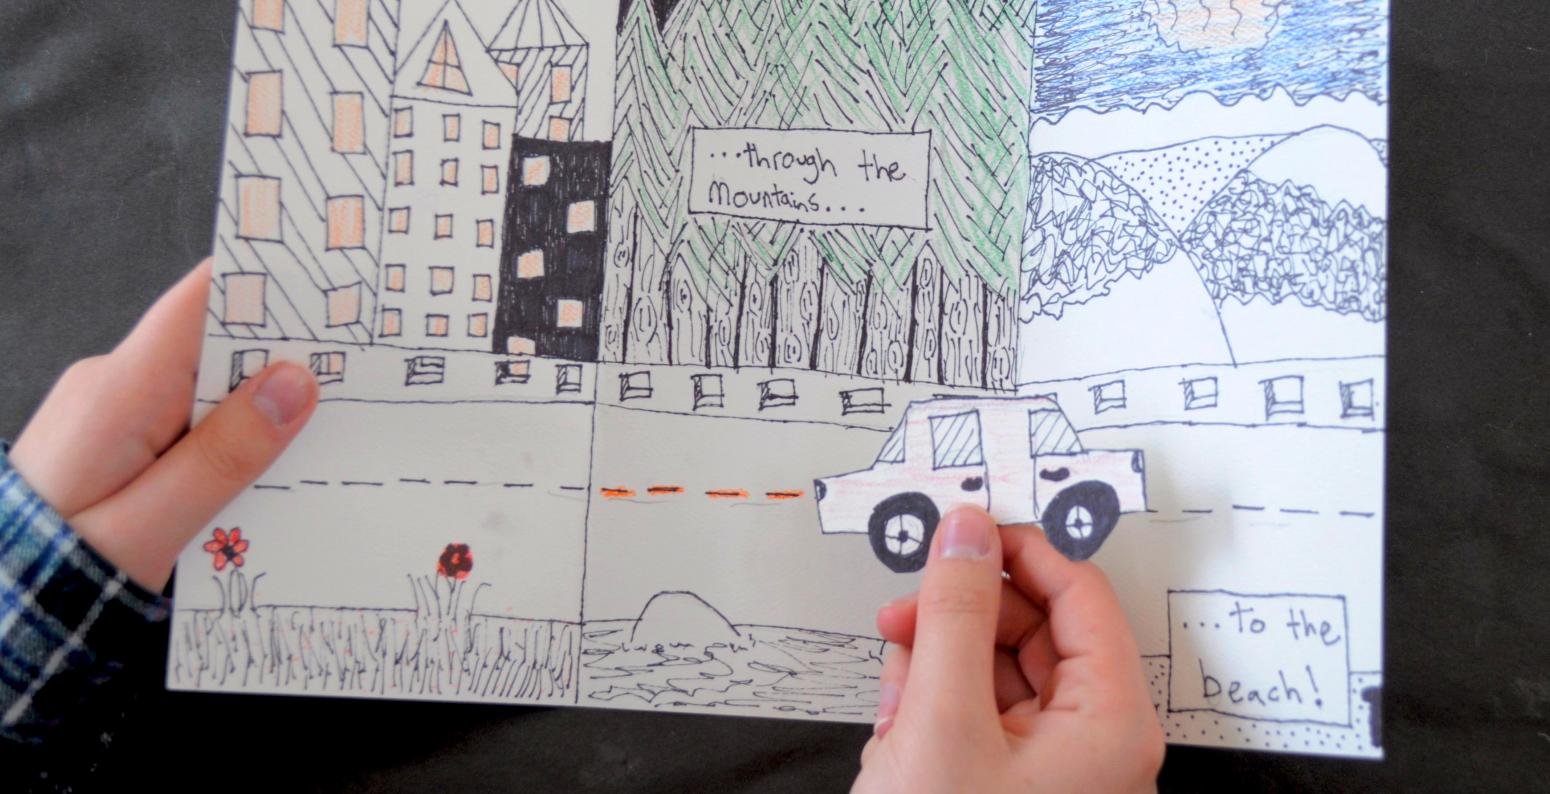 A hand holding a drawing with a road and various landscapes, with another hand holding a paper car in front as if it were driving along the road.